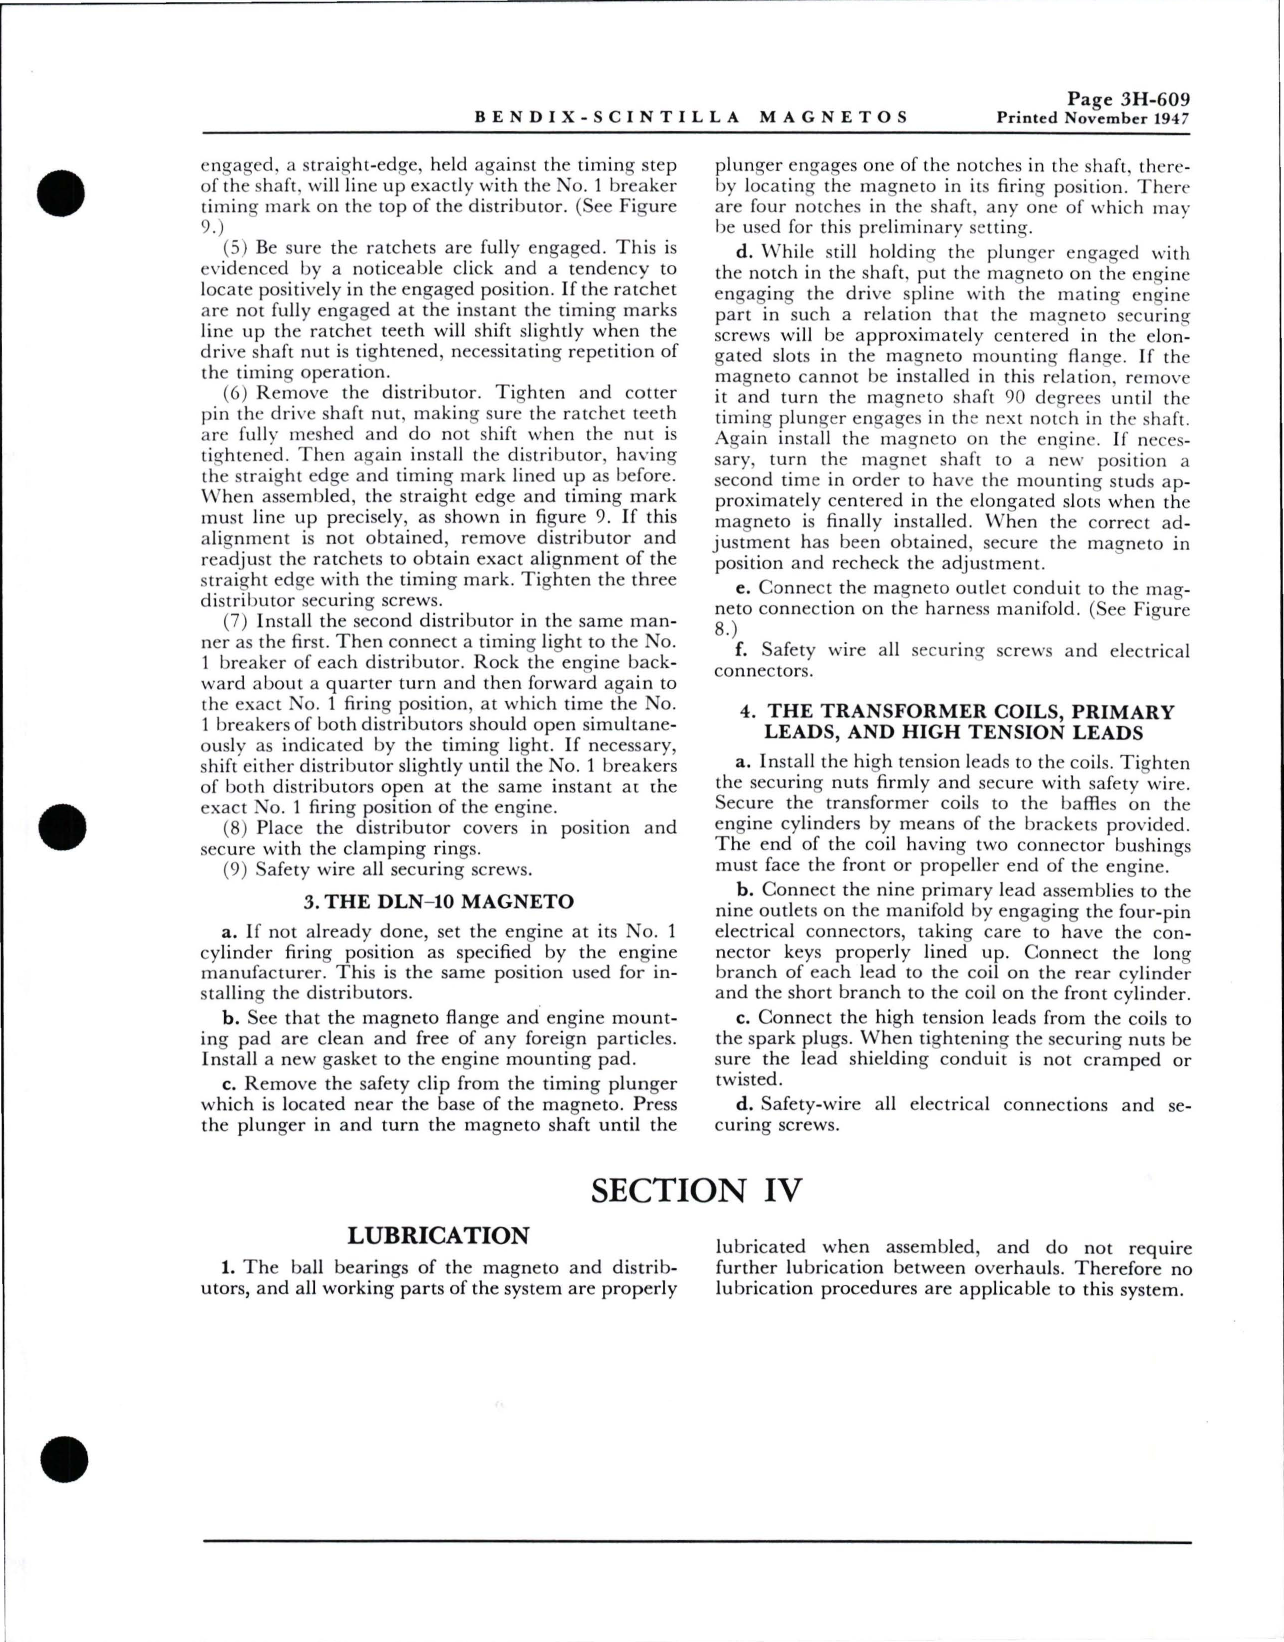 Sample page 9 from AirCorps Library document: Maintenance Manual for Double Wasp R-2800 CB Series - Part 166498